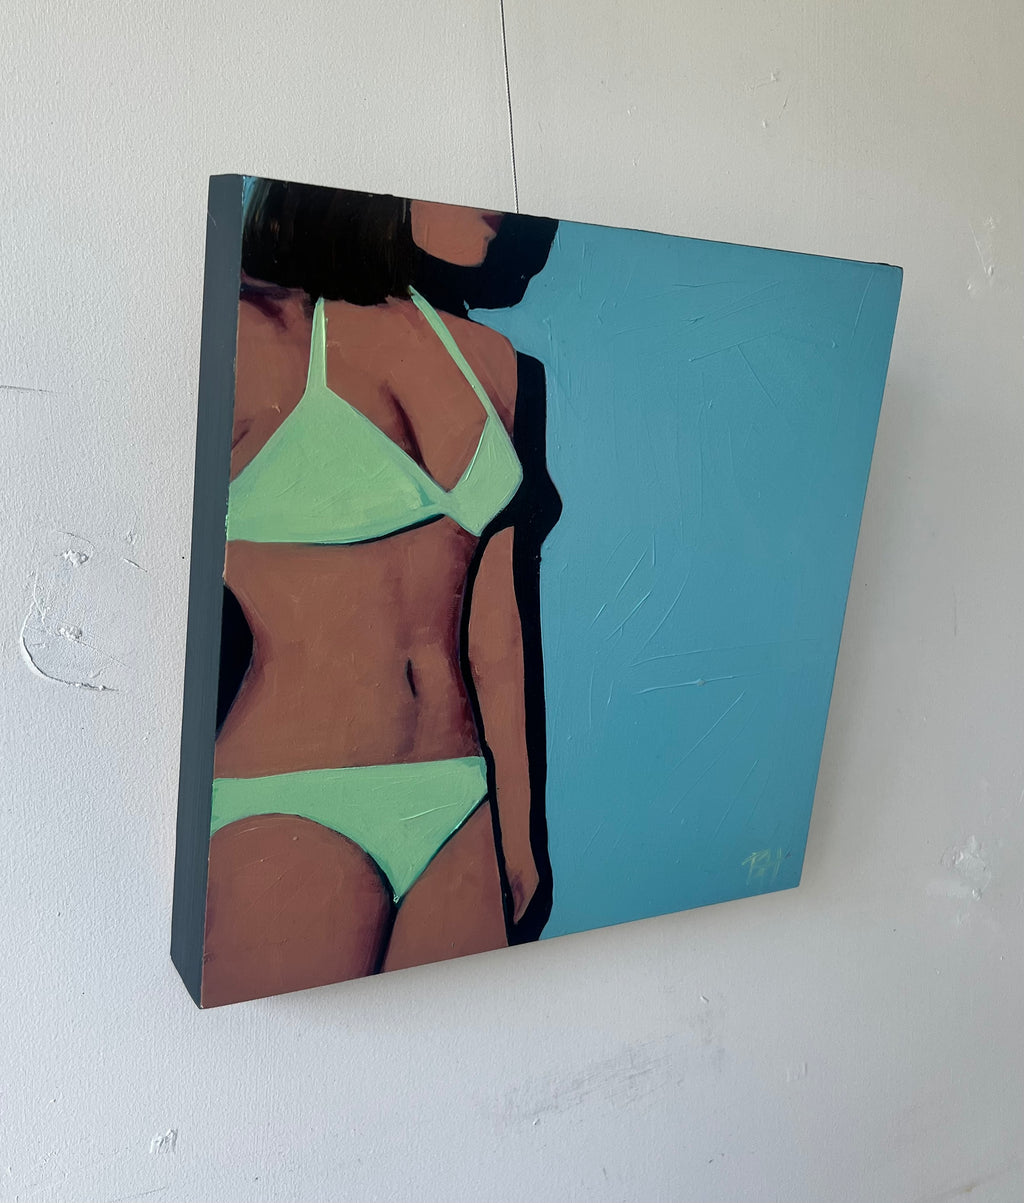 Oil on canvas painting of a woman in a green bikini against a blue wall. The woman's face is in profile and only to the lips..